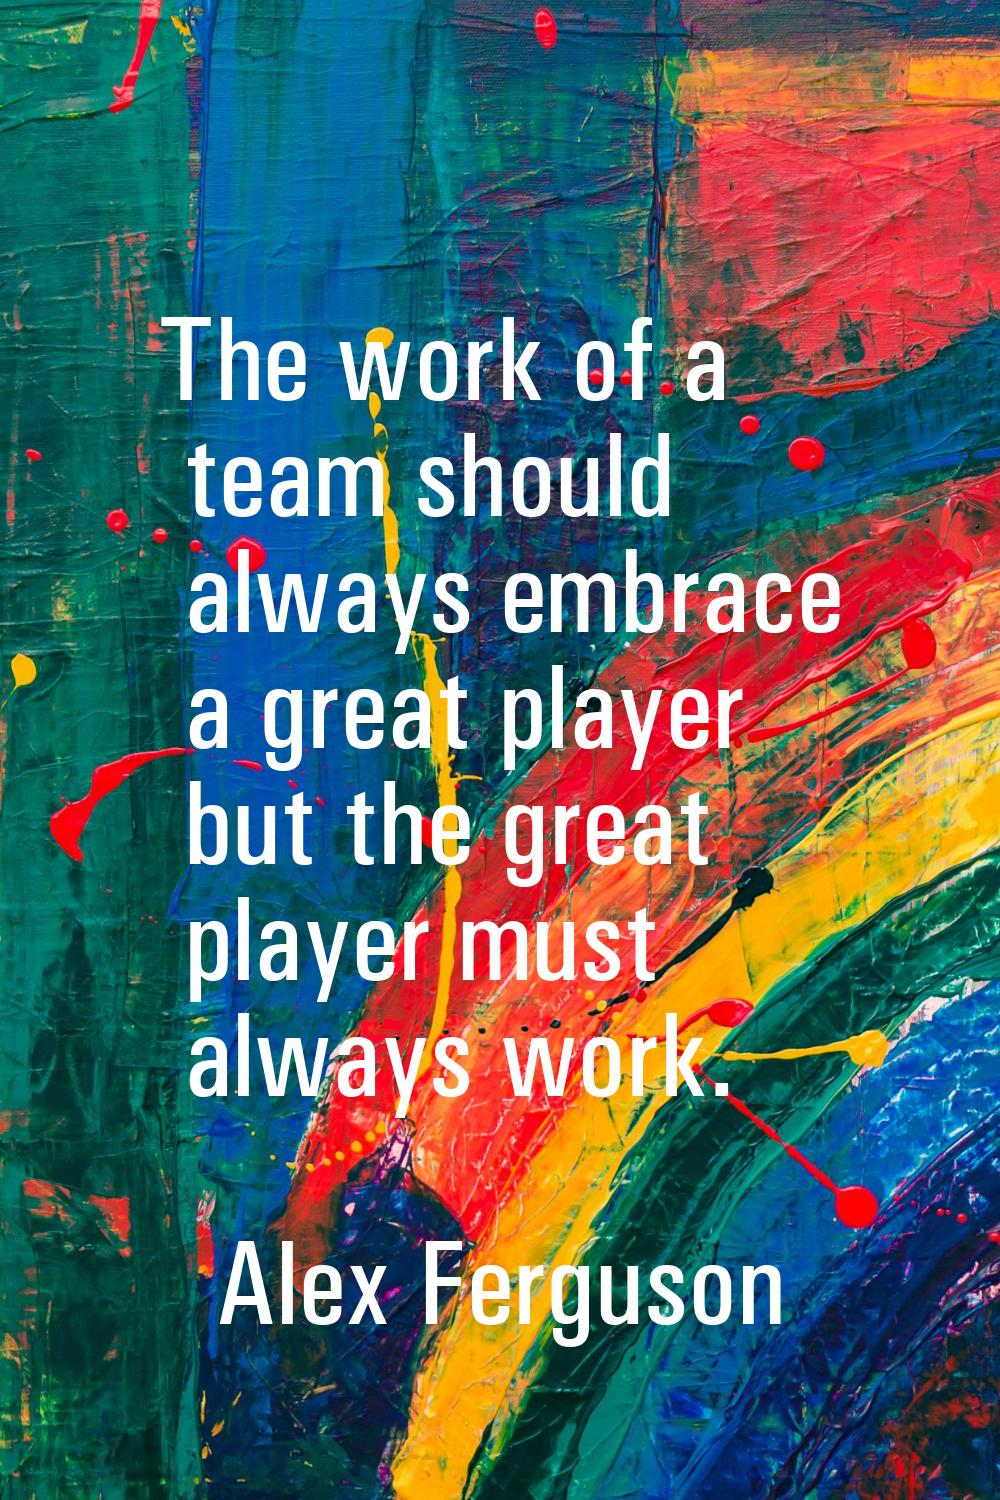 The work of a team should always embrace a great player but the great player must always work.